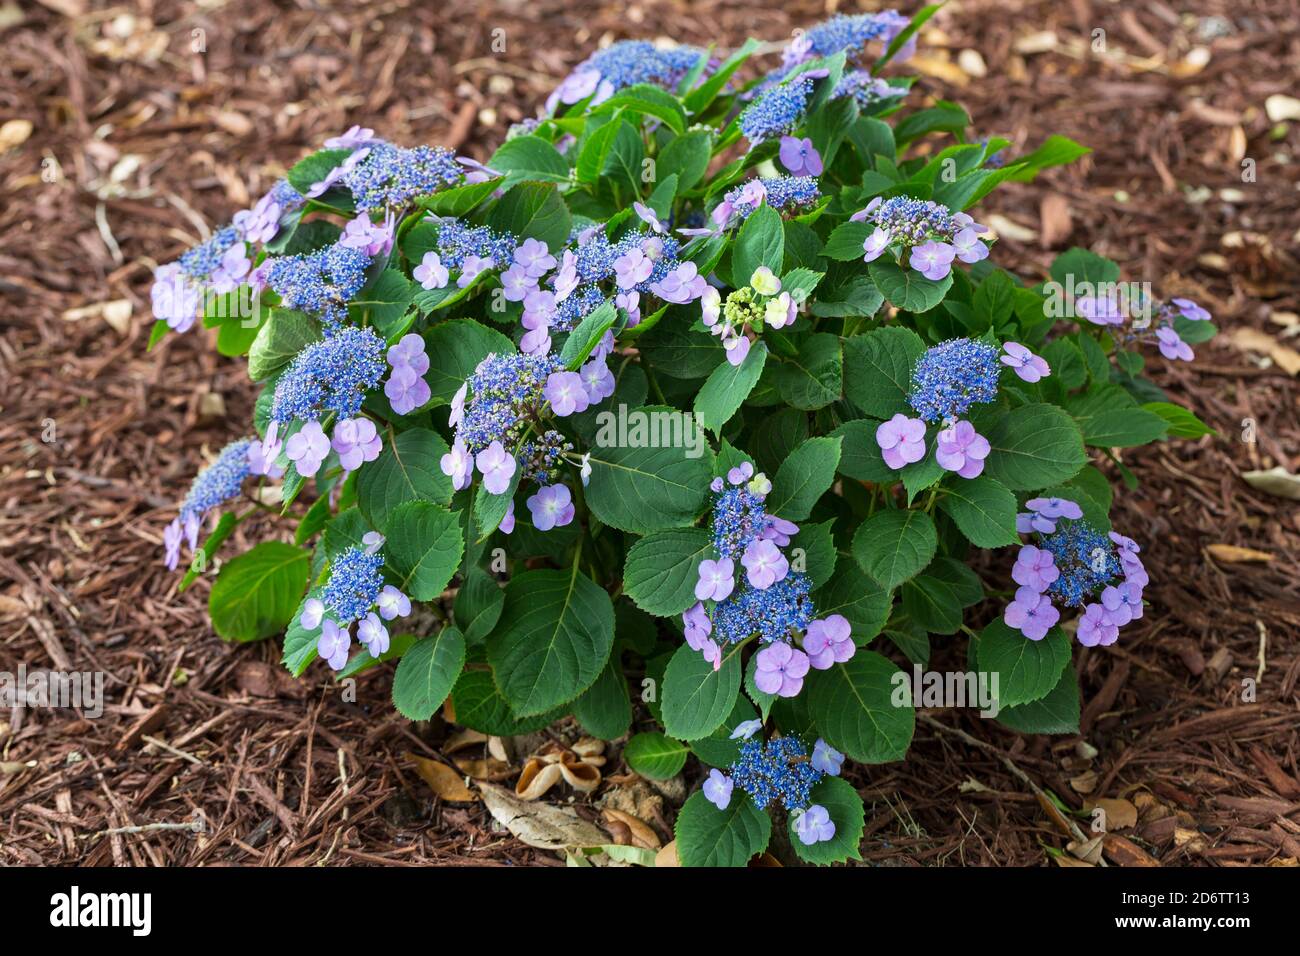 Hydrangea macrophylla, lacecap hydrangea with blue and mauve flowers Stock Photo